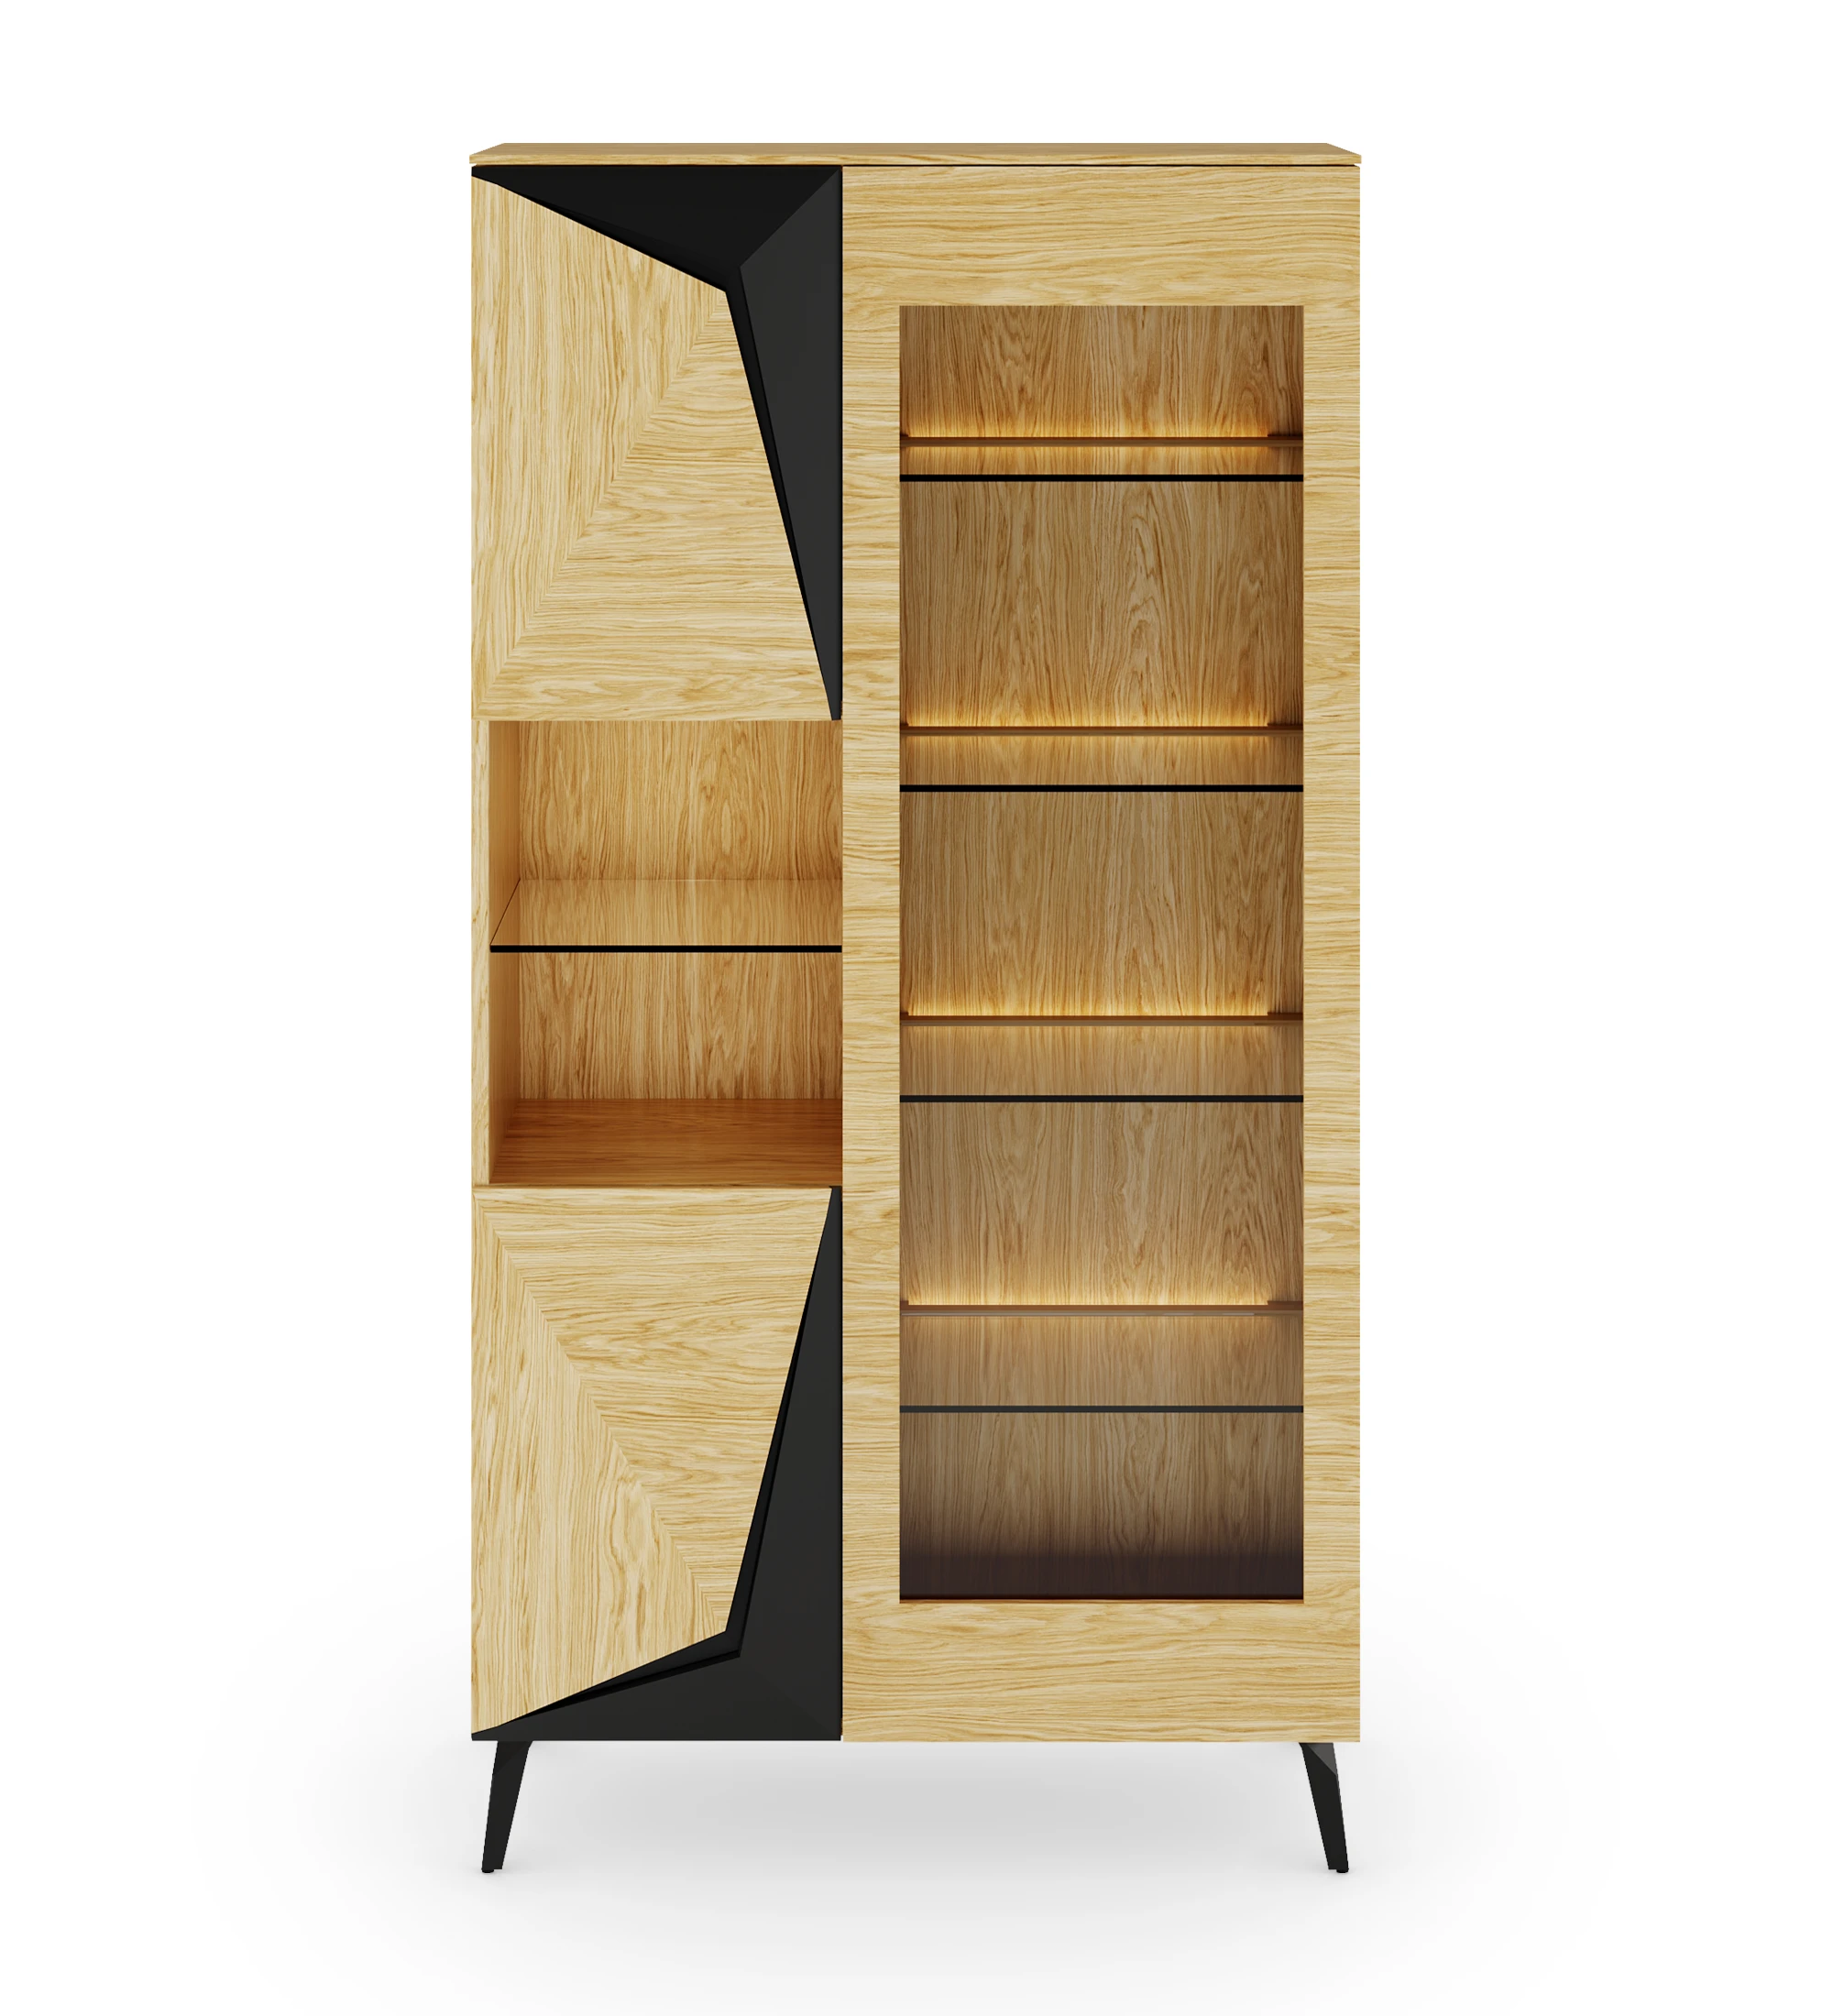 Showcase with 4 doors in natural oak with black details, with natural oak structure and black lacquered metal base.